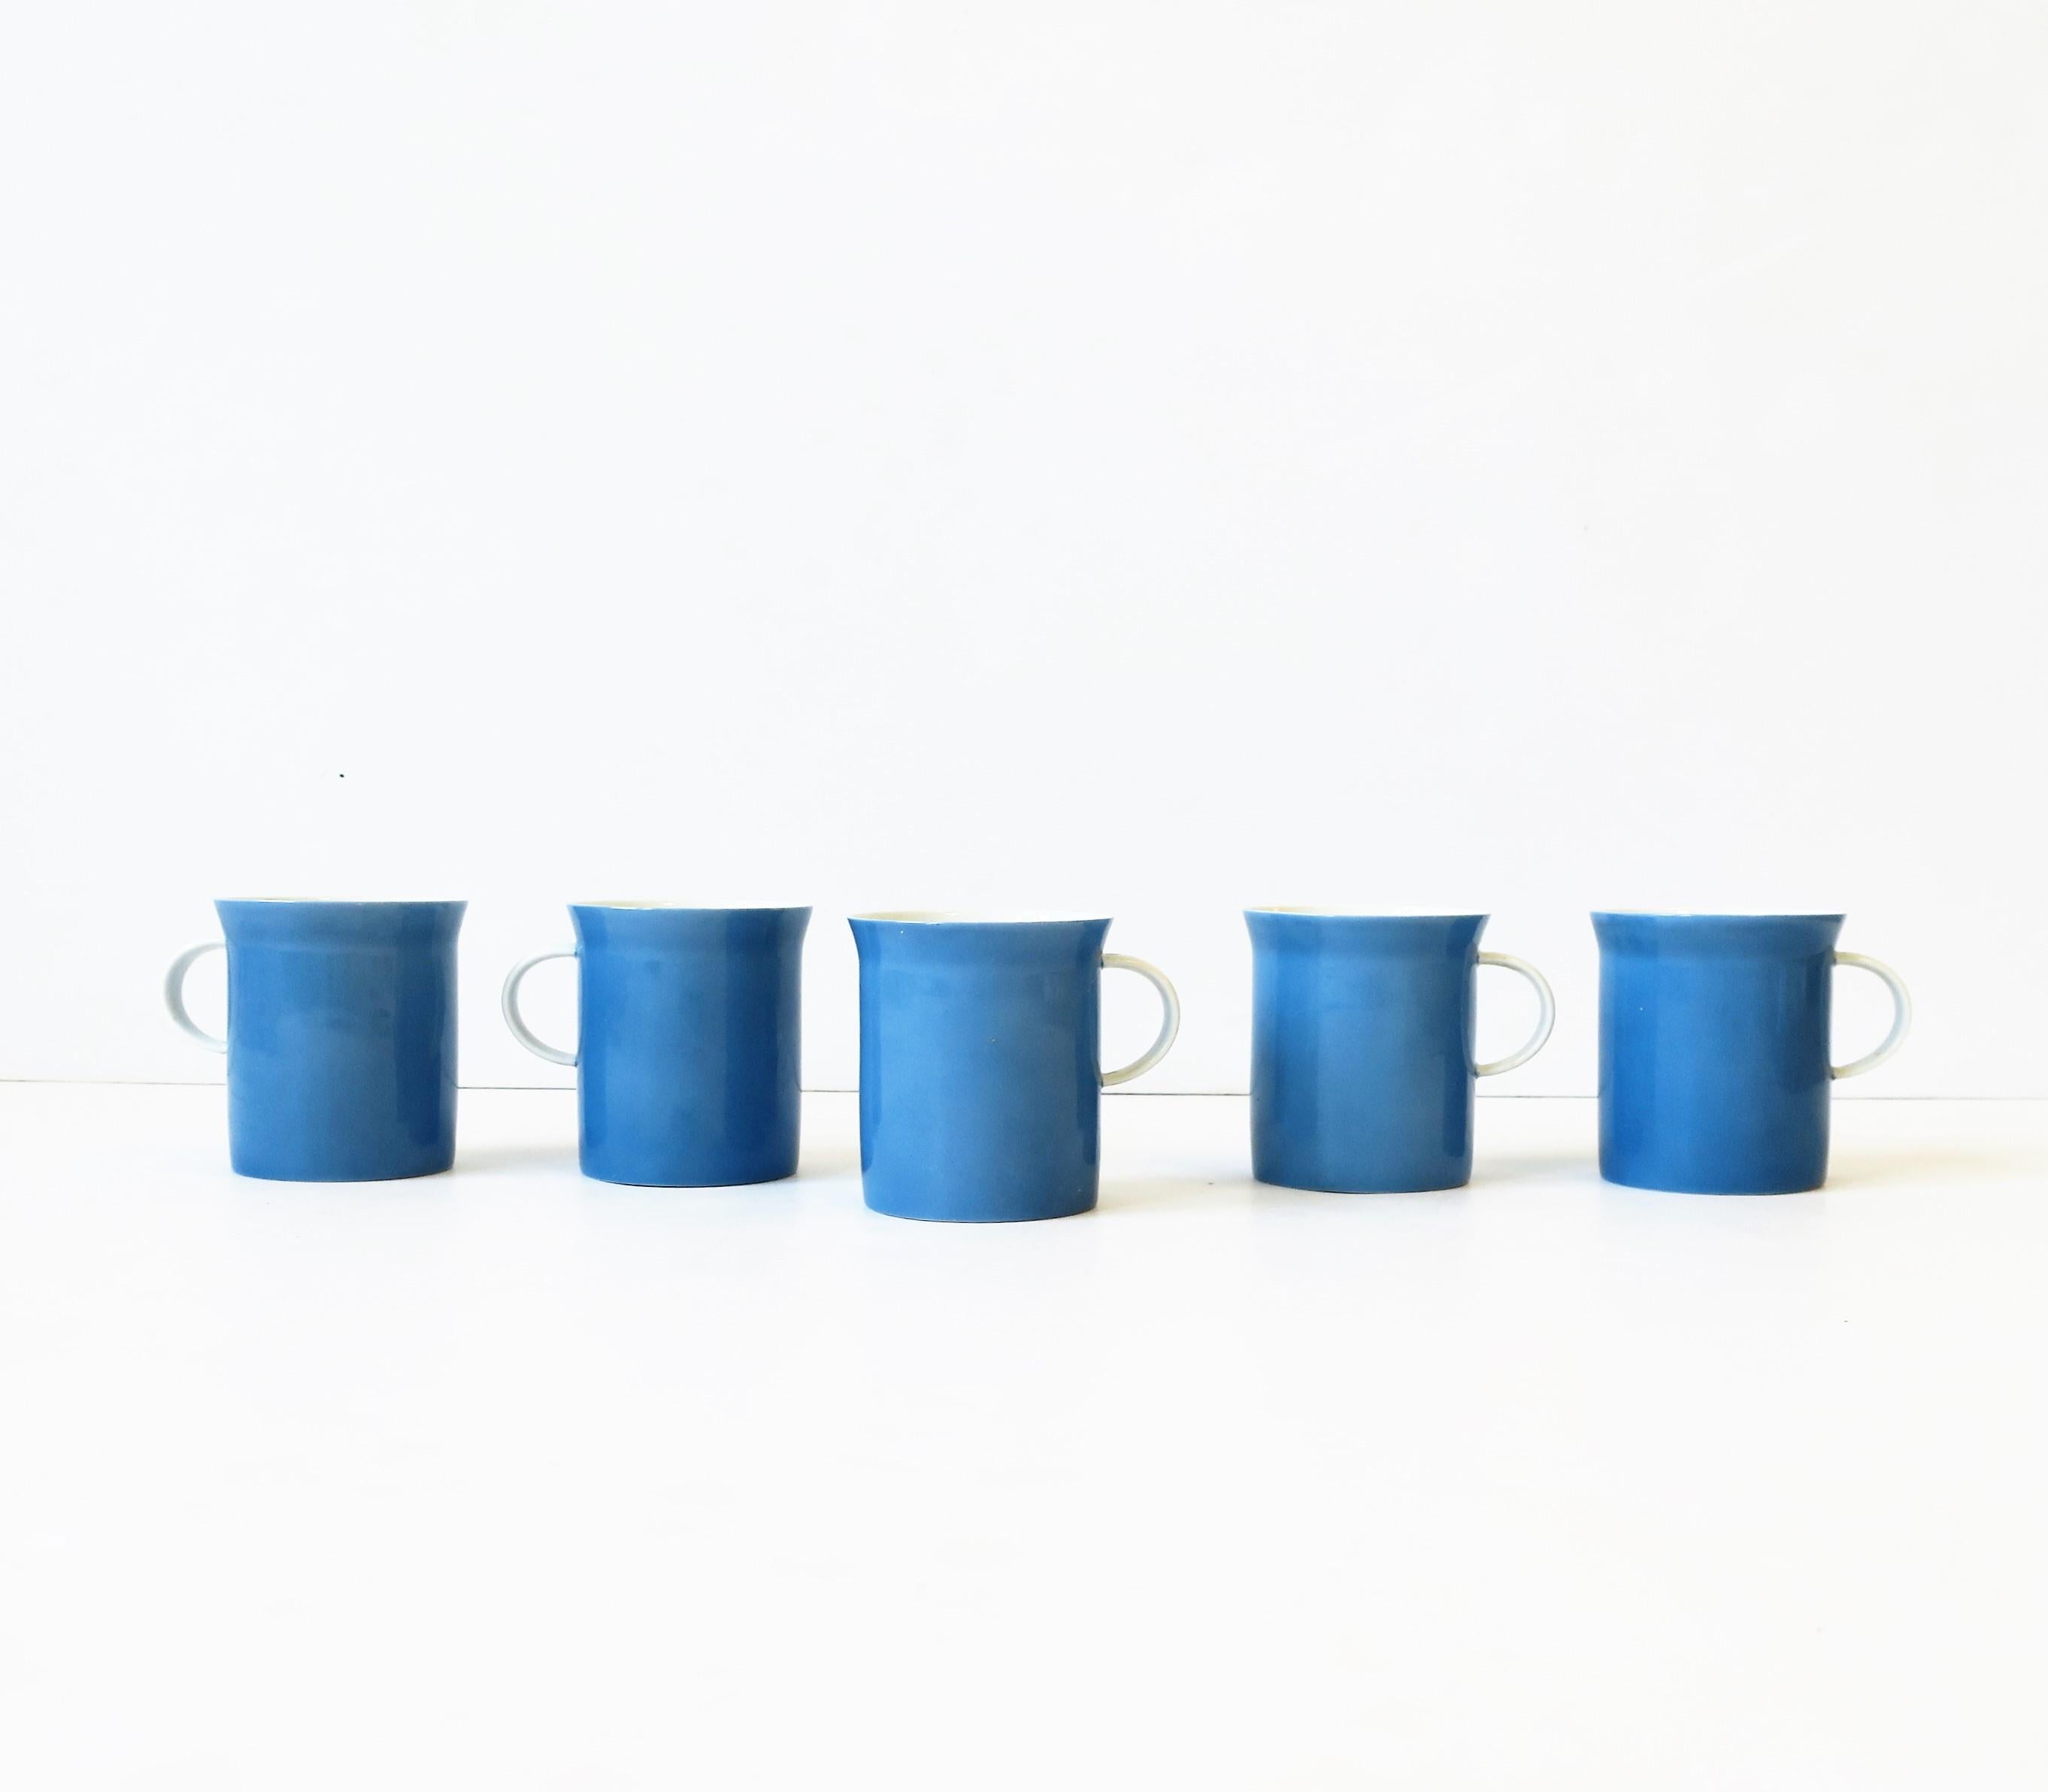 A very beautiful and rare set of five (5) Mid-Century Modern blue and white porcelain coffee or tea cups by Rosenthal, circa Mid-20th century, Germany. With maker's mark on bottom as show in images #12 and 13. 

Each cup measures: 2.5